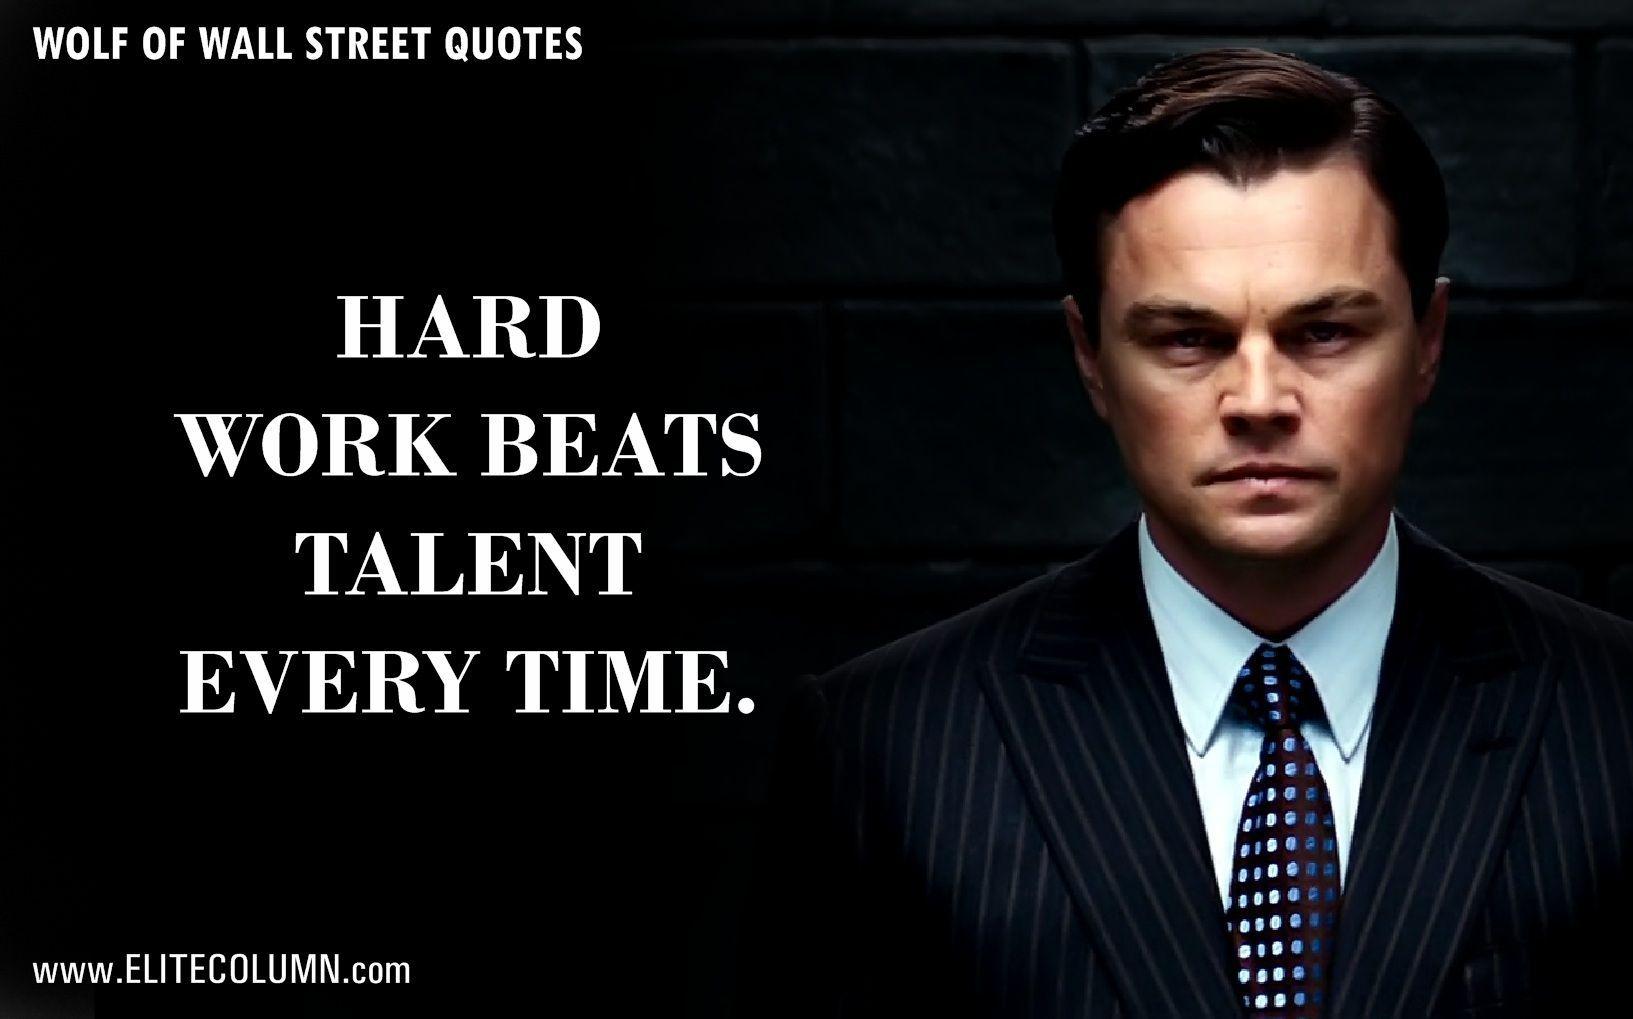 Wolf Of Wall Street Quotes Wallpapers - Top Free Wolf Of Wall Street